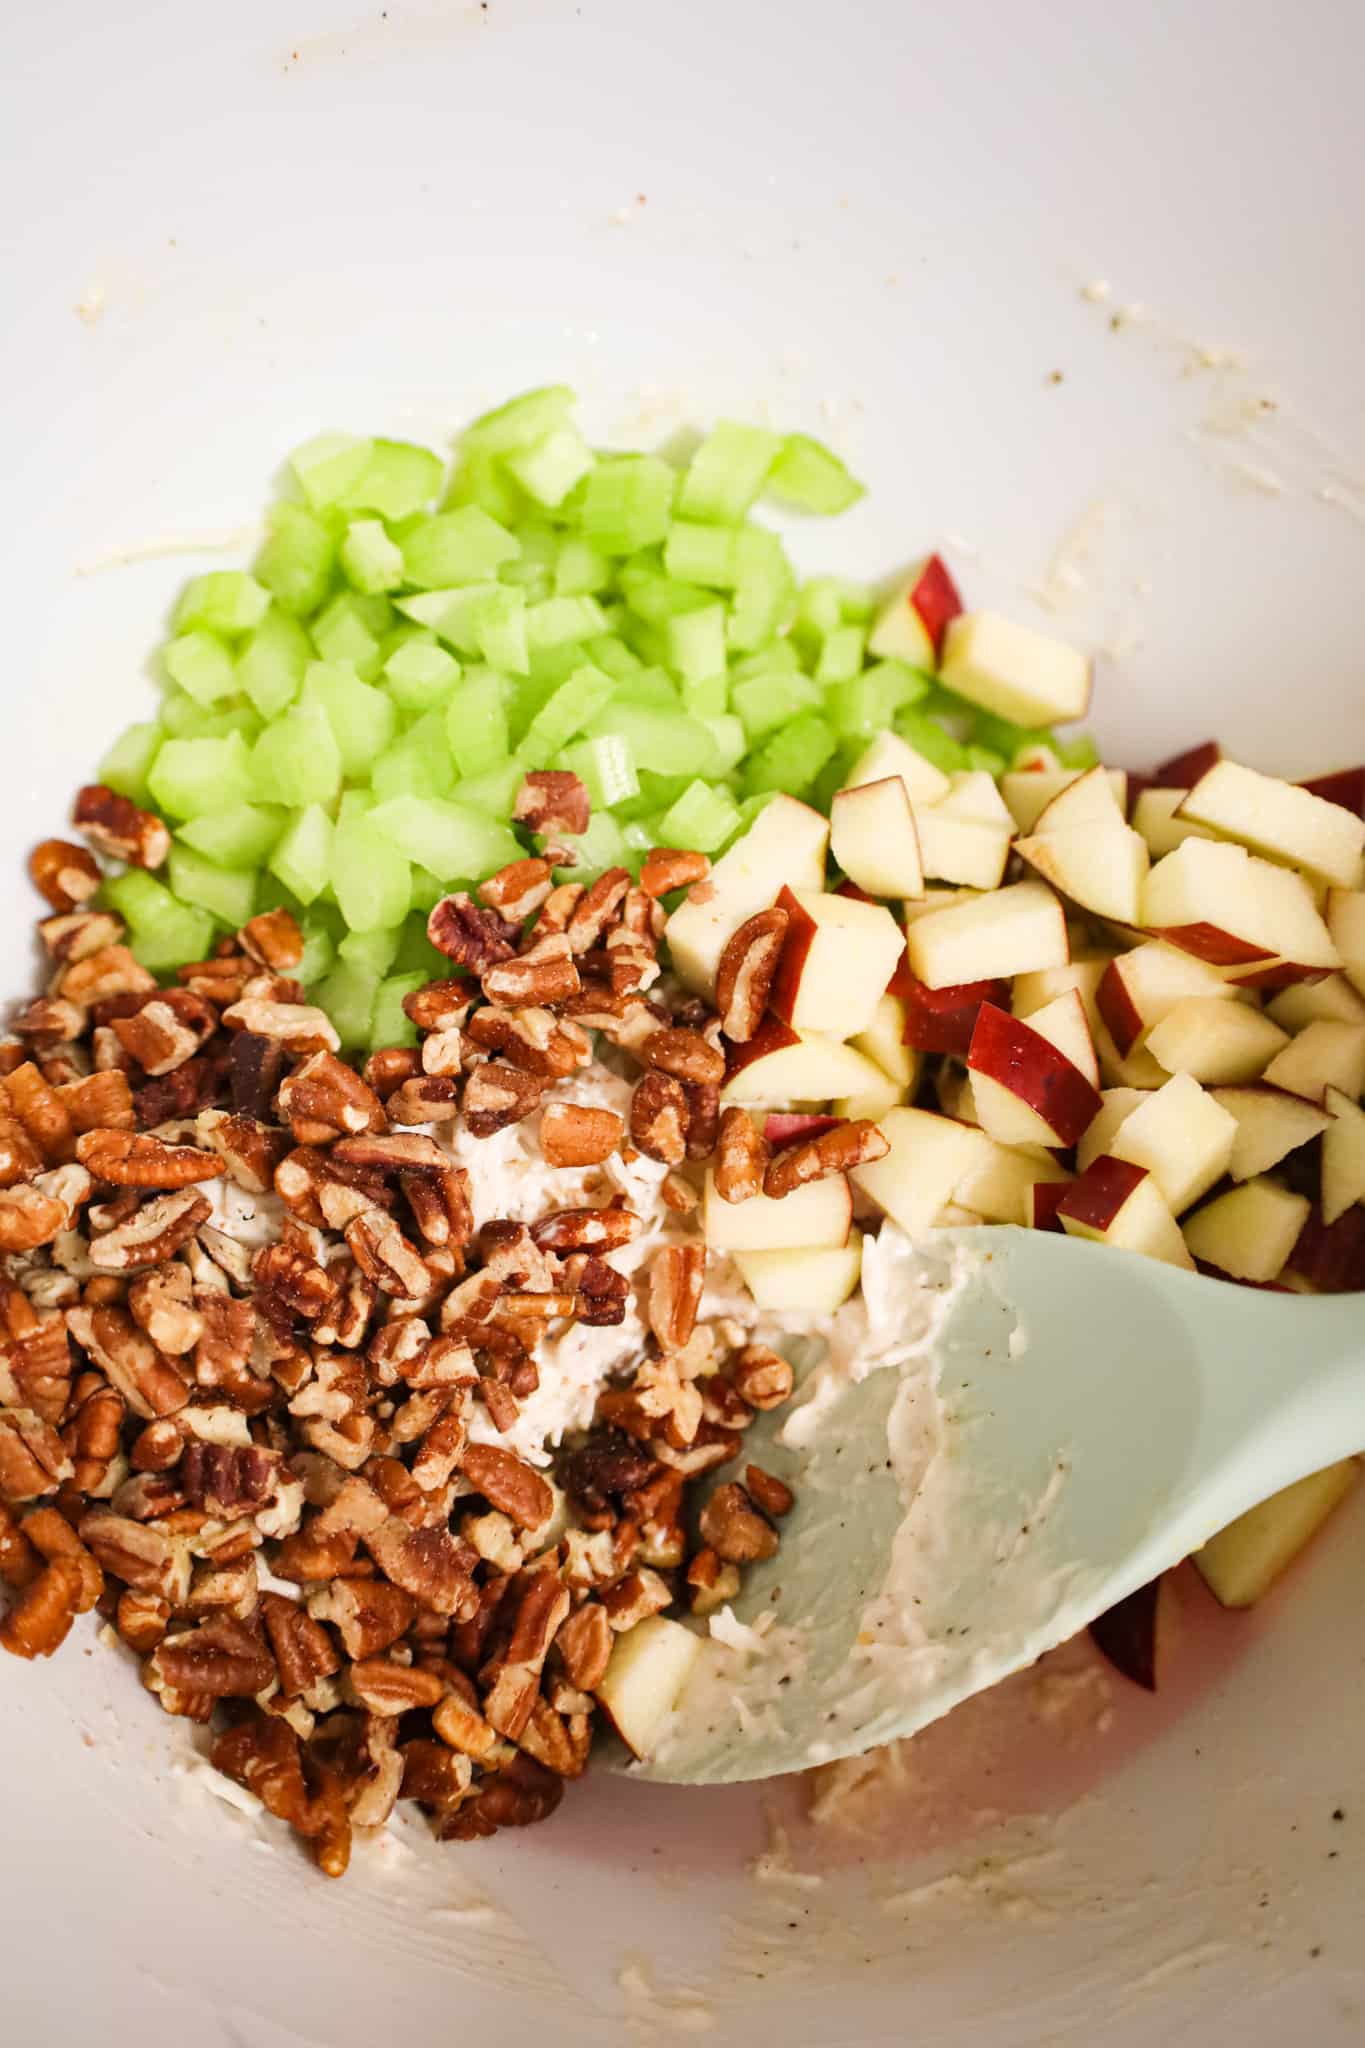 pecan pieces, diced celery and diced apples on top of shredded chicken and mayo mixture in a mixing bowl